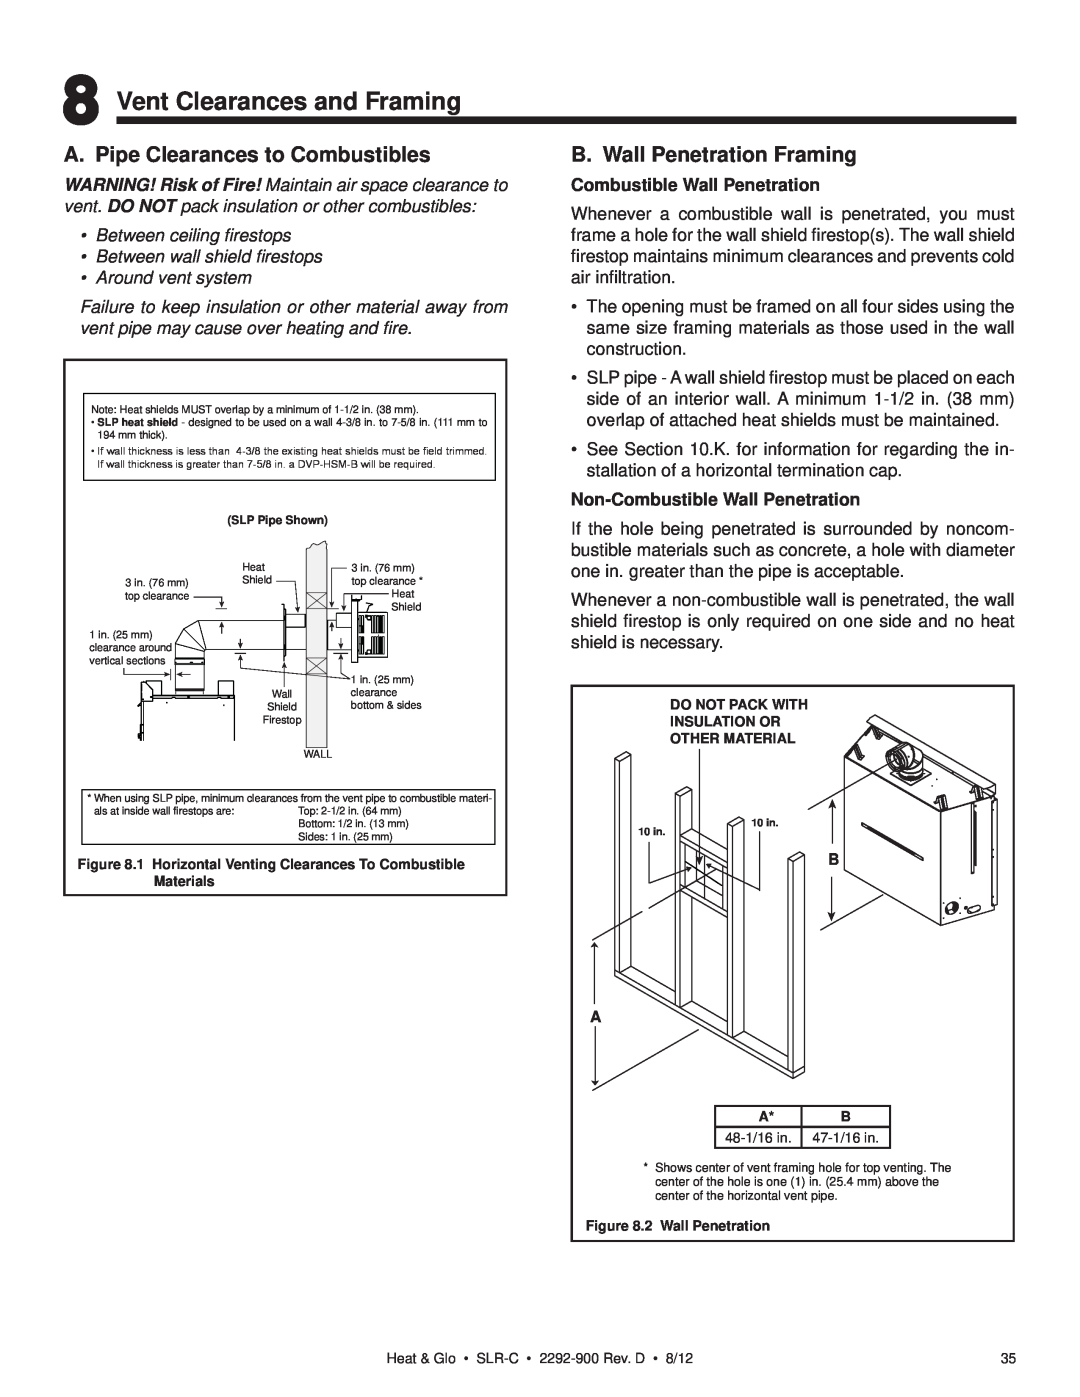 Heat & Glo LifeStyle SLR-C (COSMO) owner manual Vent Clearances and Framing, A. Pipe Clearances to Combustibles 